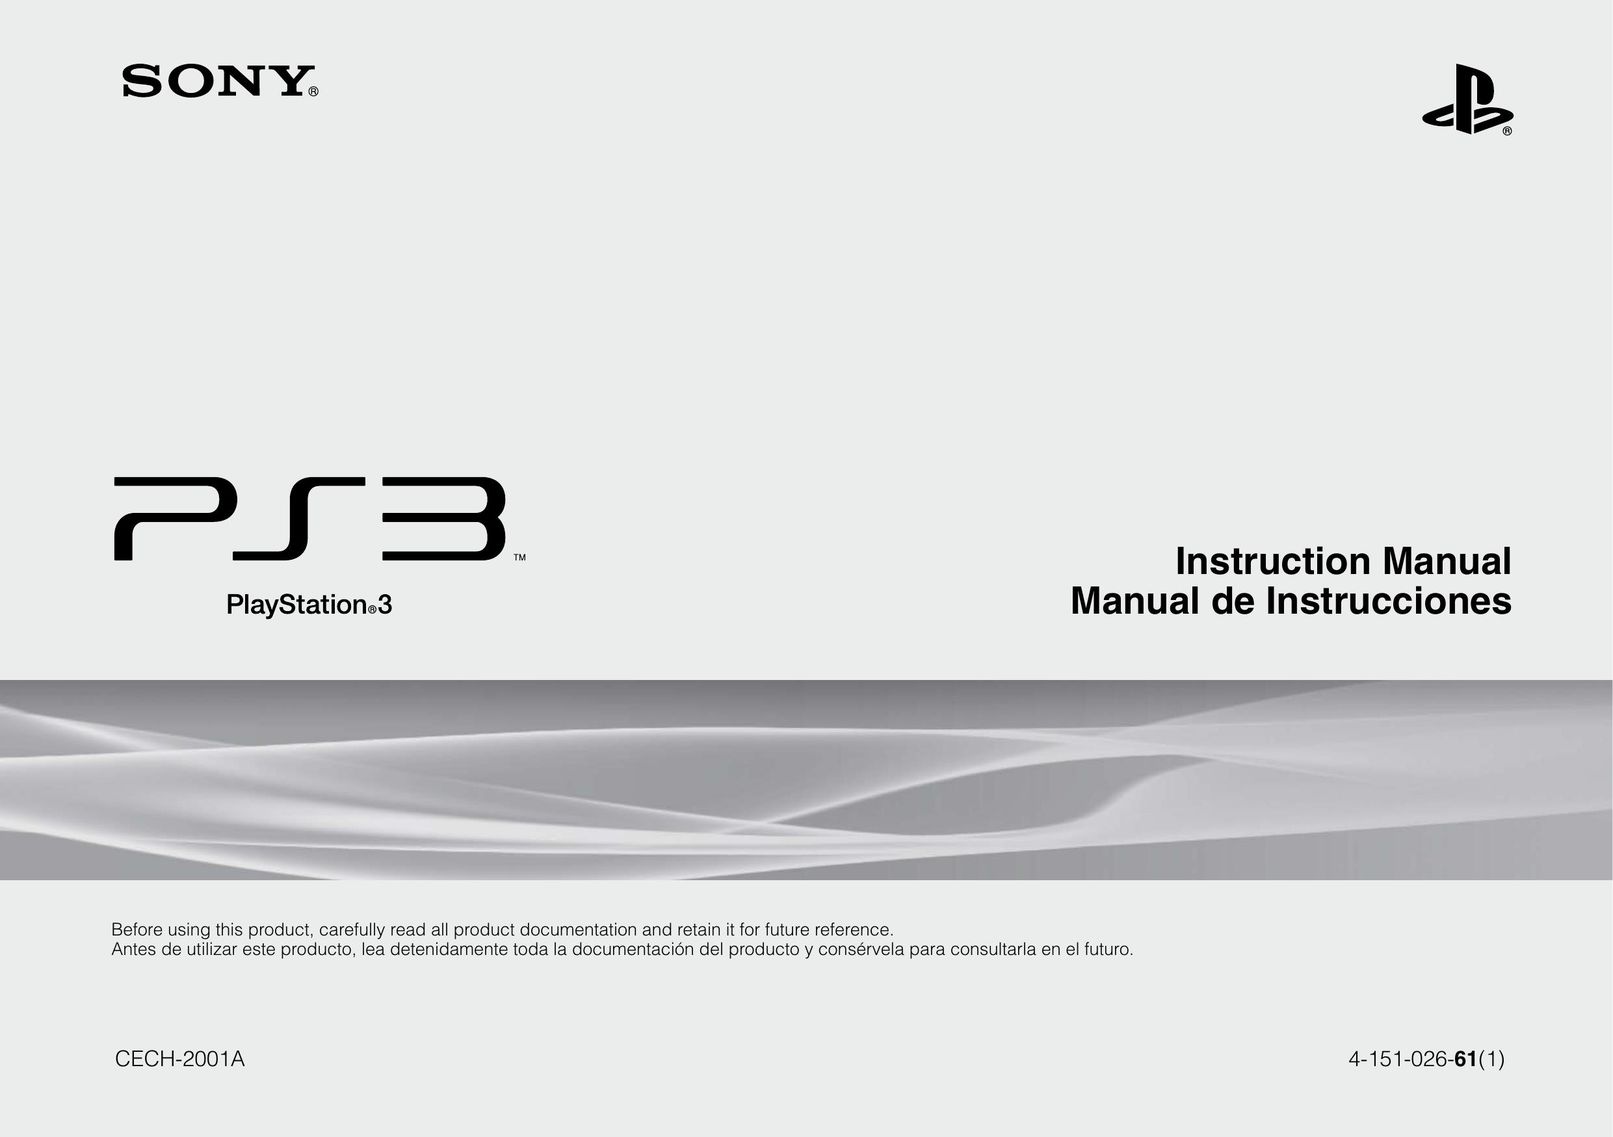 Sony 99073 Video Game Console User Manual